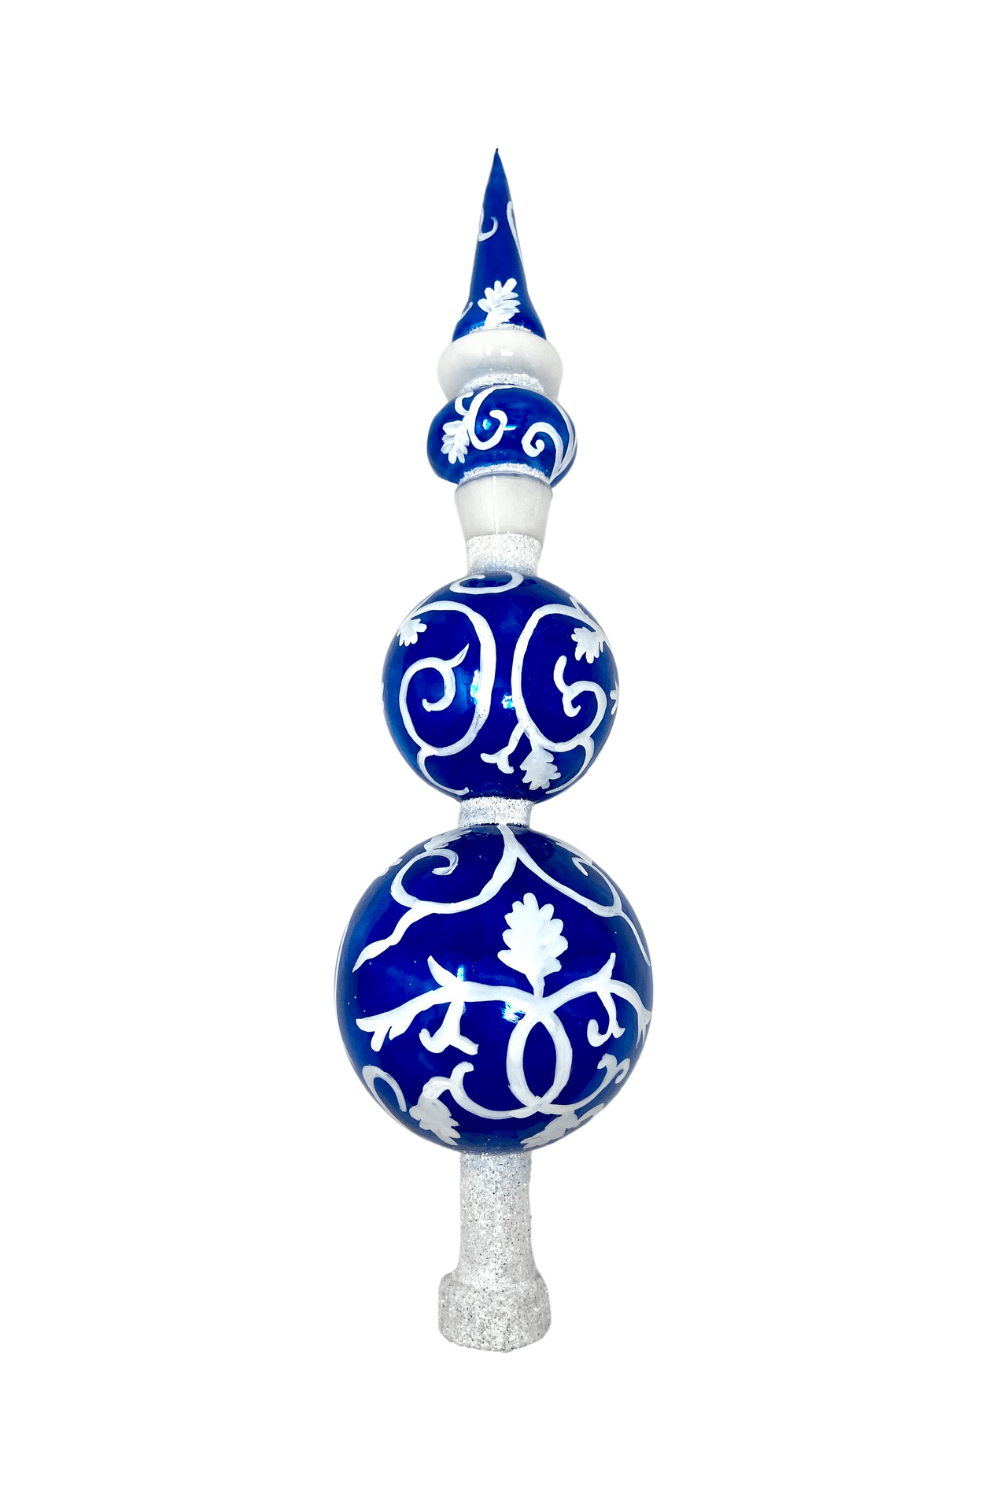 Stunningly large colorful christmas tree finial with mutliple baubles and pointed cap.